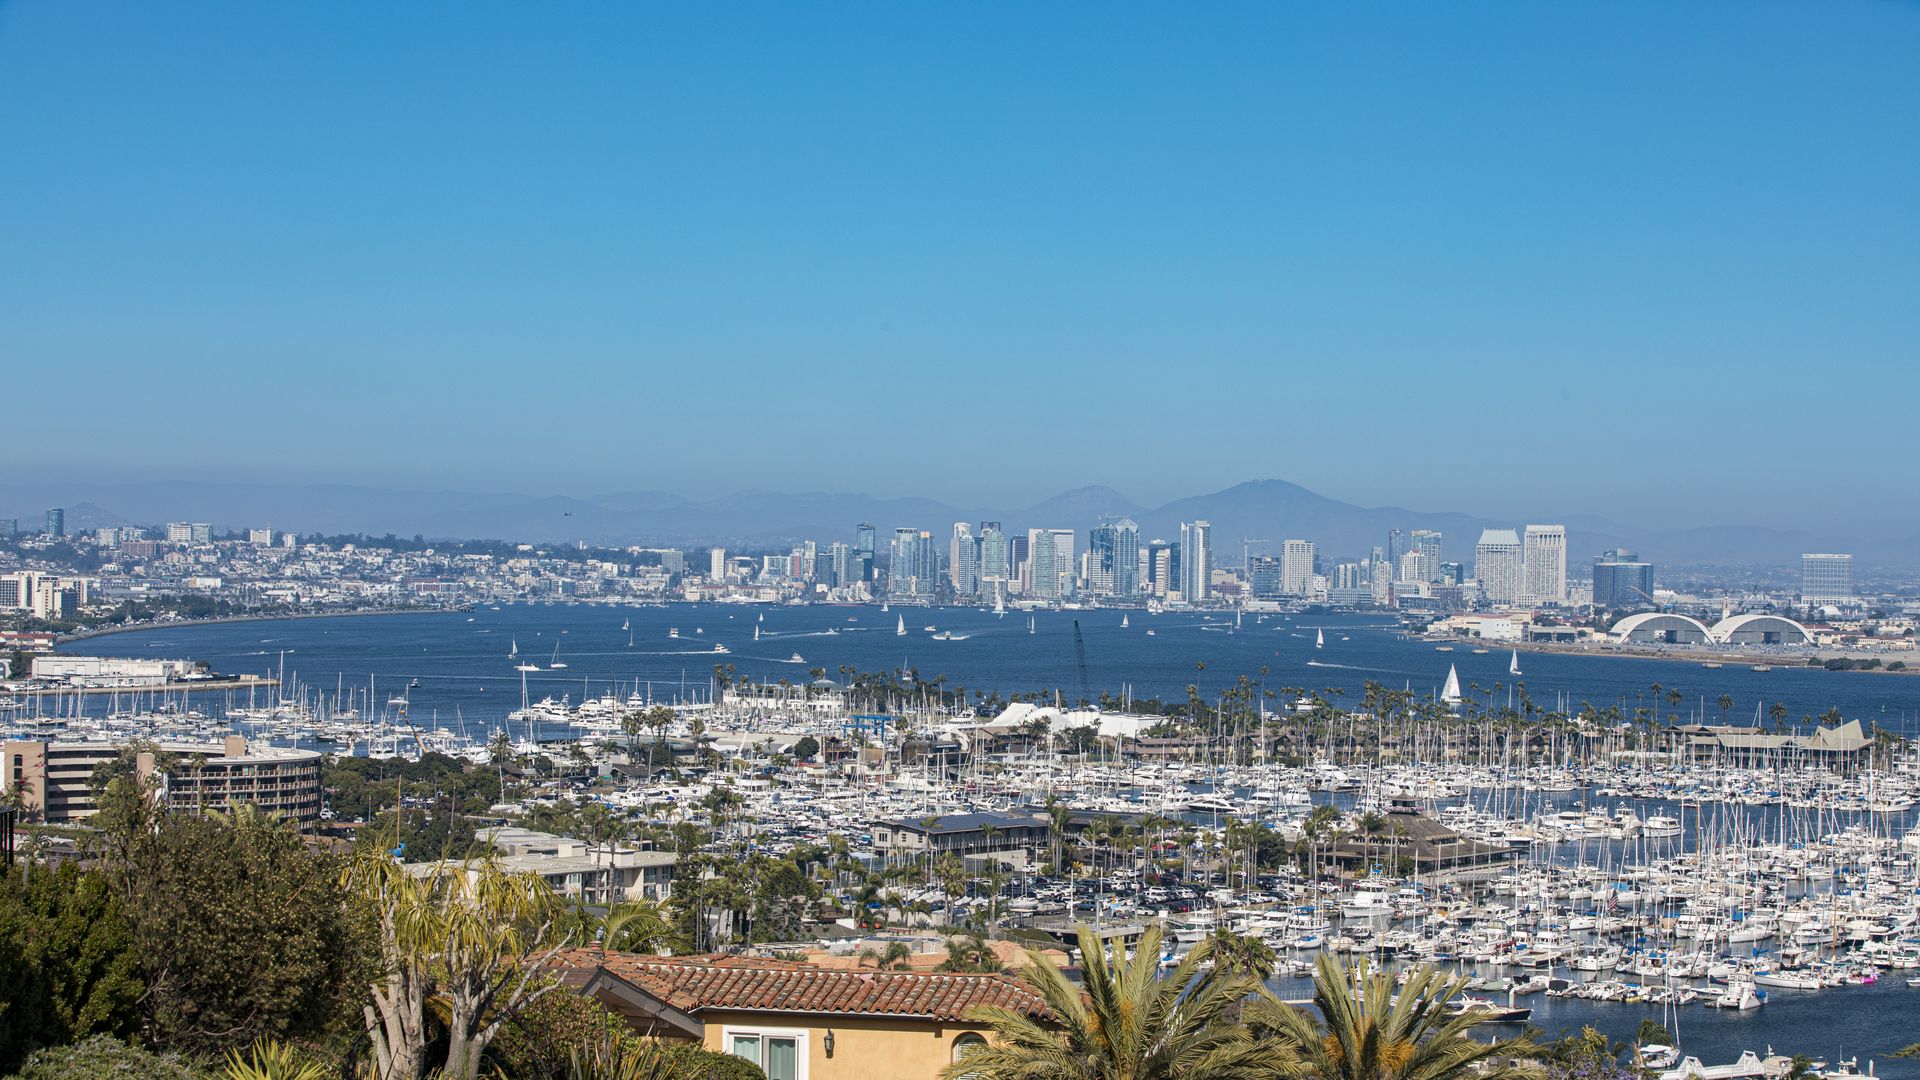 Boats sit in the San Diego Bay with the water, city skyline and mountains in the background and palm trees in the foregraound.